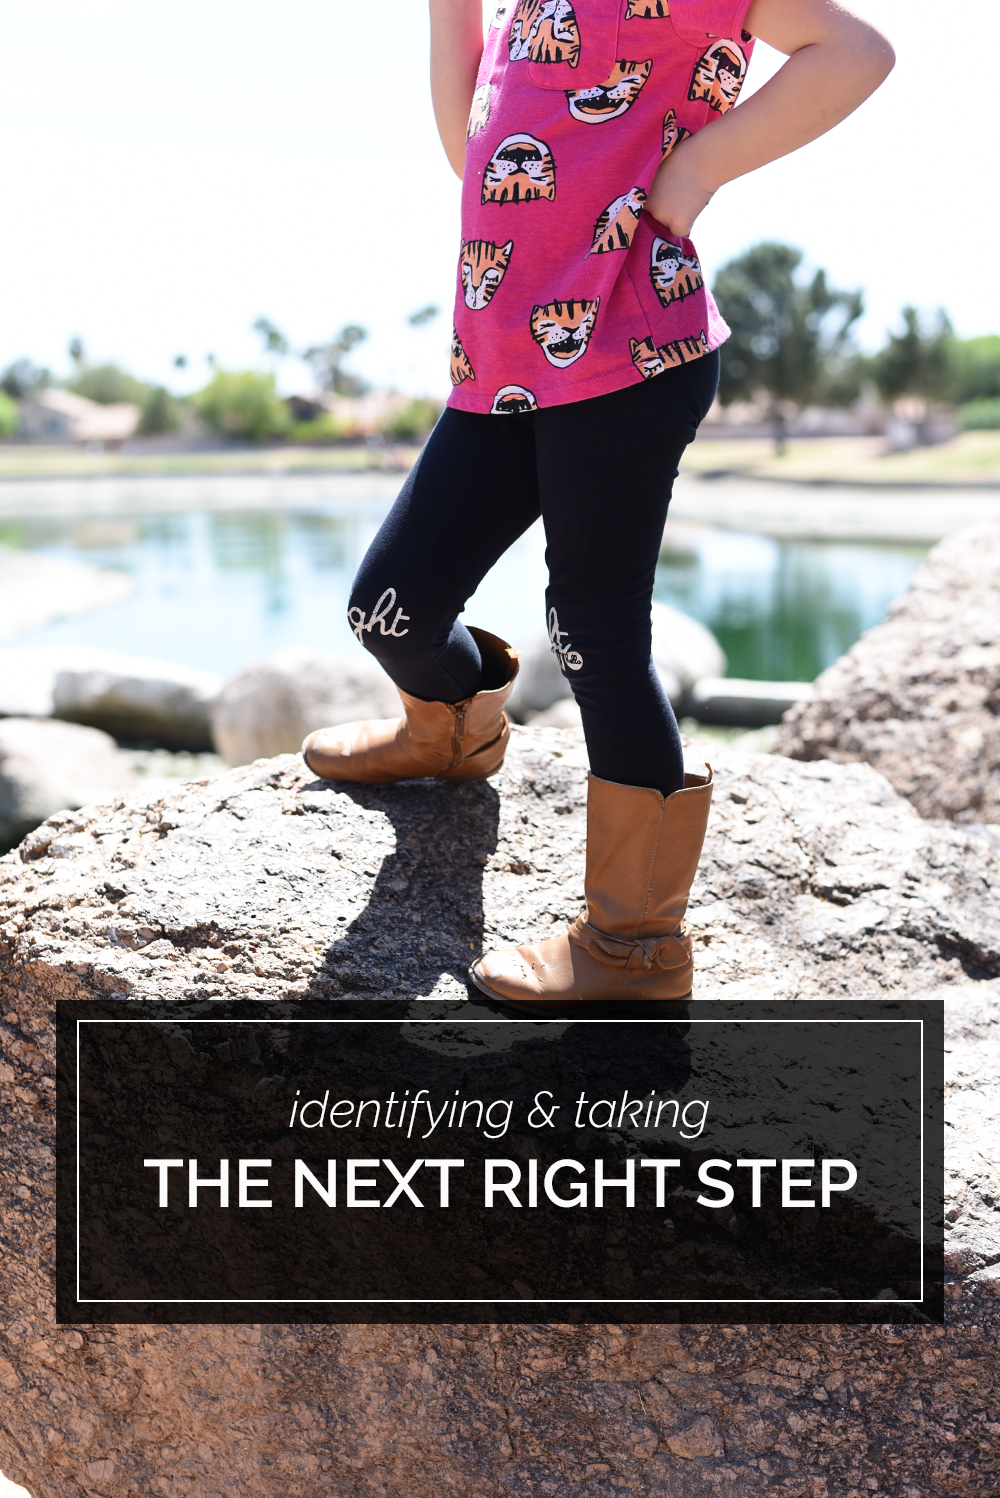 A step by step guide for identifying and taking your next right step